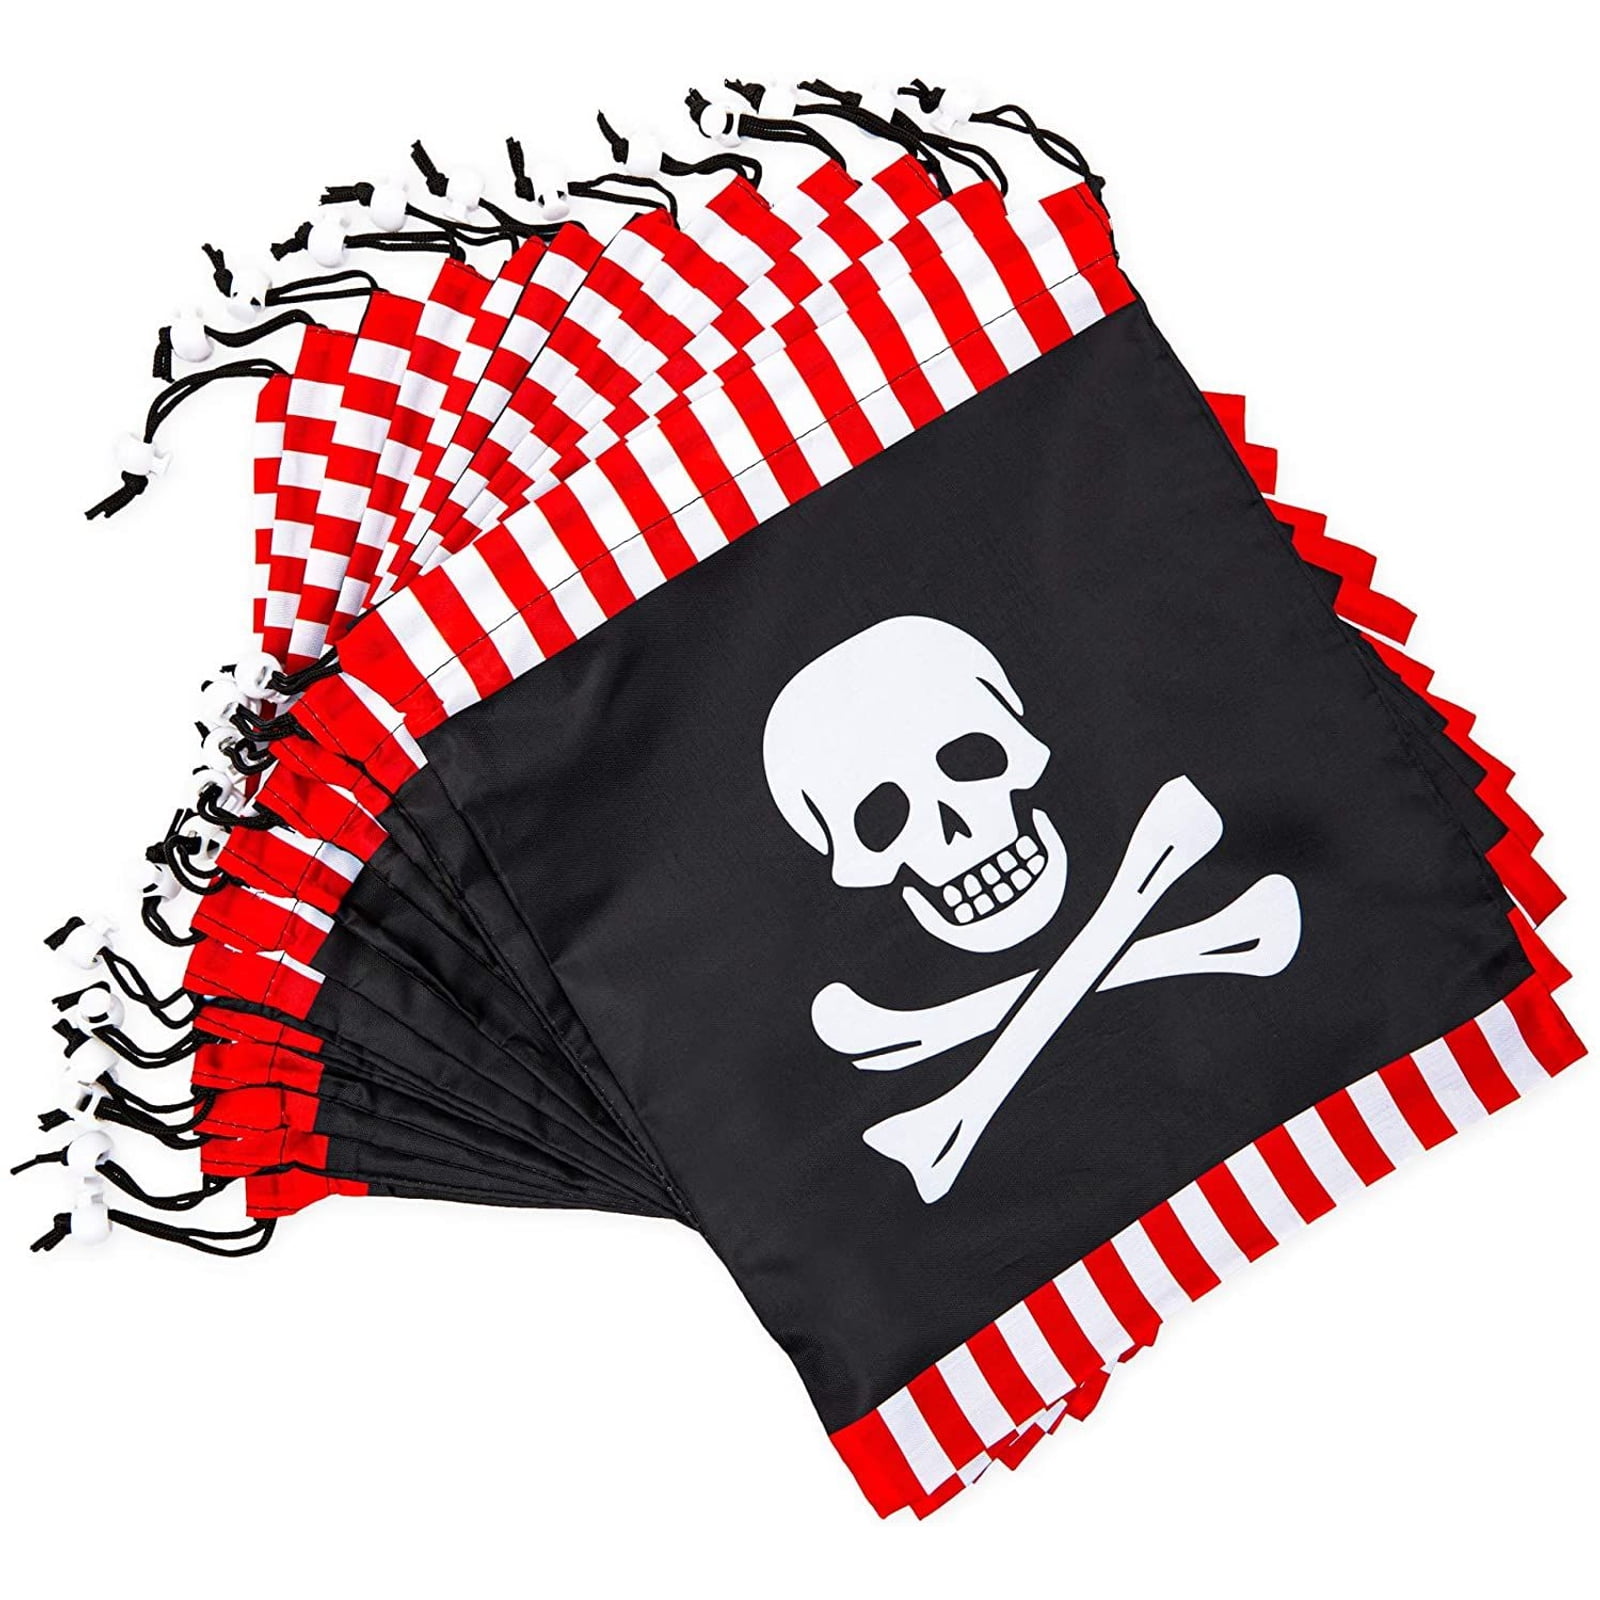 12 Pirate Ship Flag Parrot Paddle Balls Birthday Party Goody Loot Bag Favor Game 